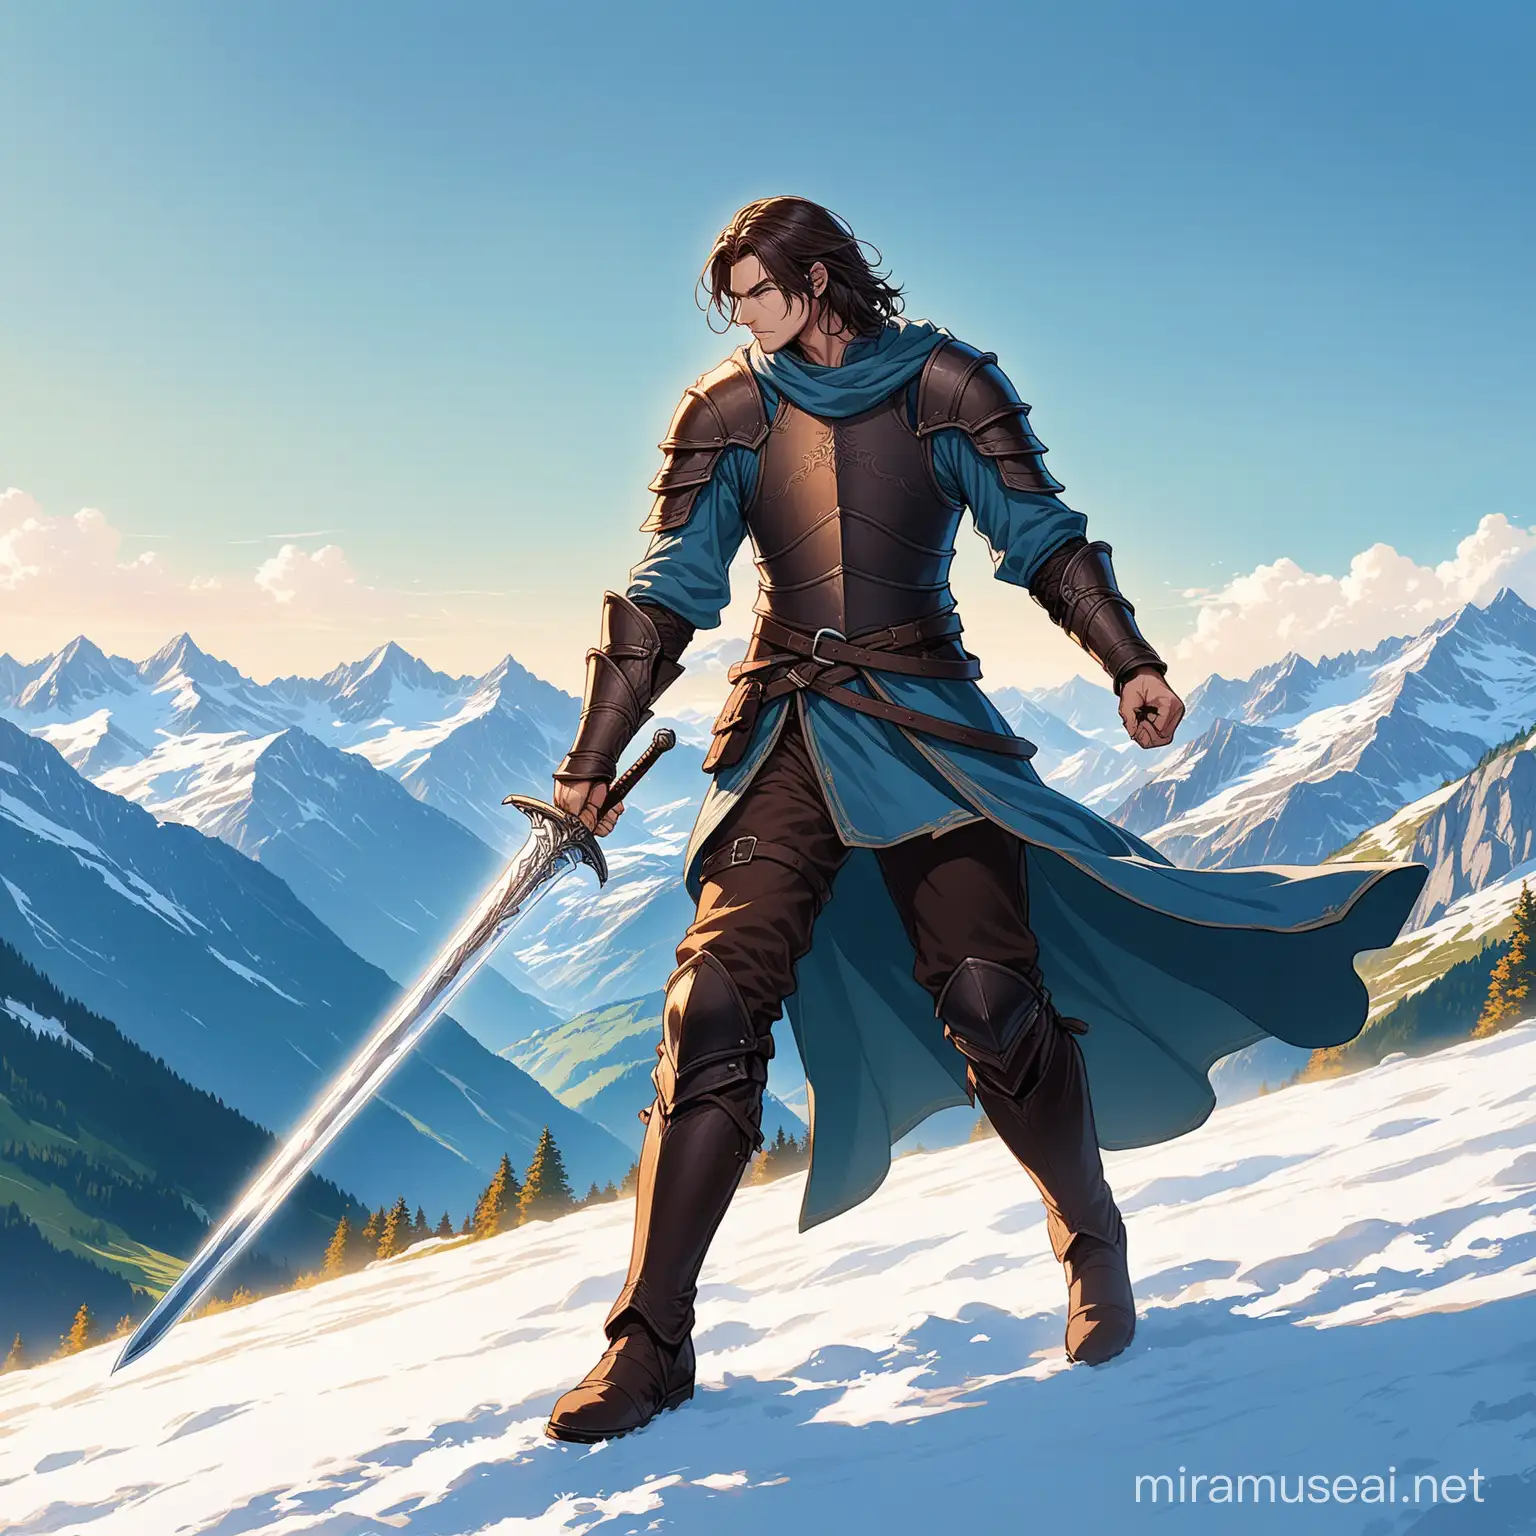 Dark Blue Haired Warrior in Leather Armor with Longsword in the Alps